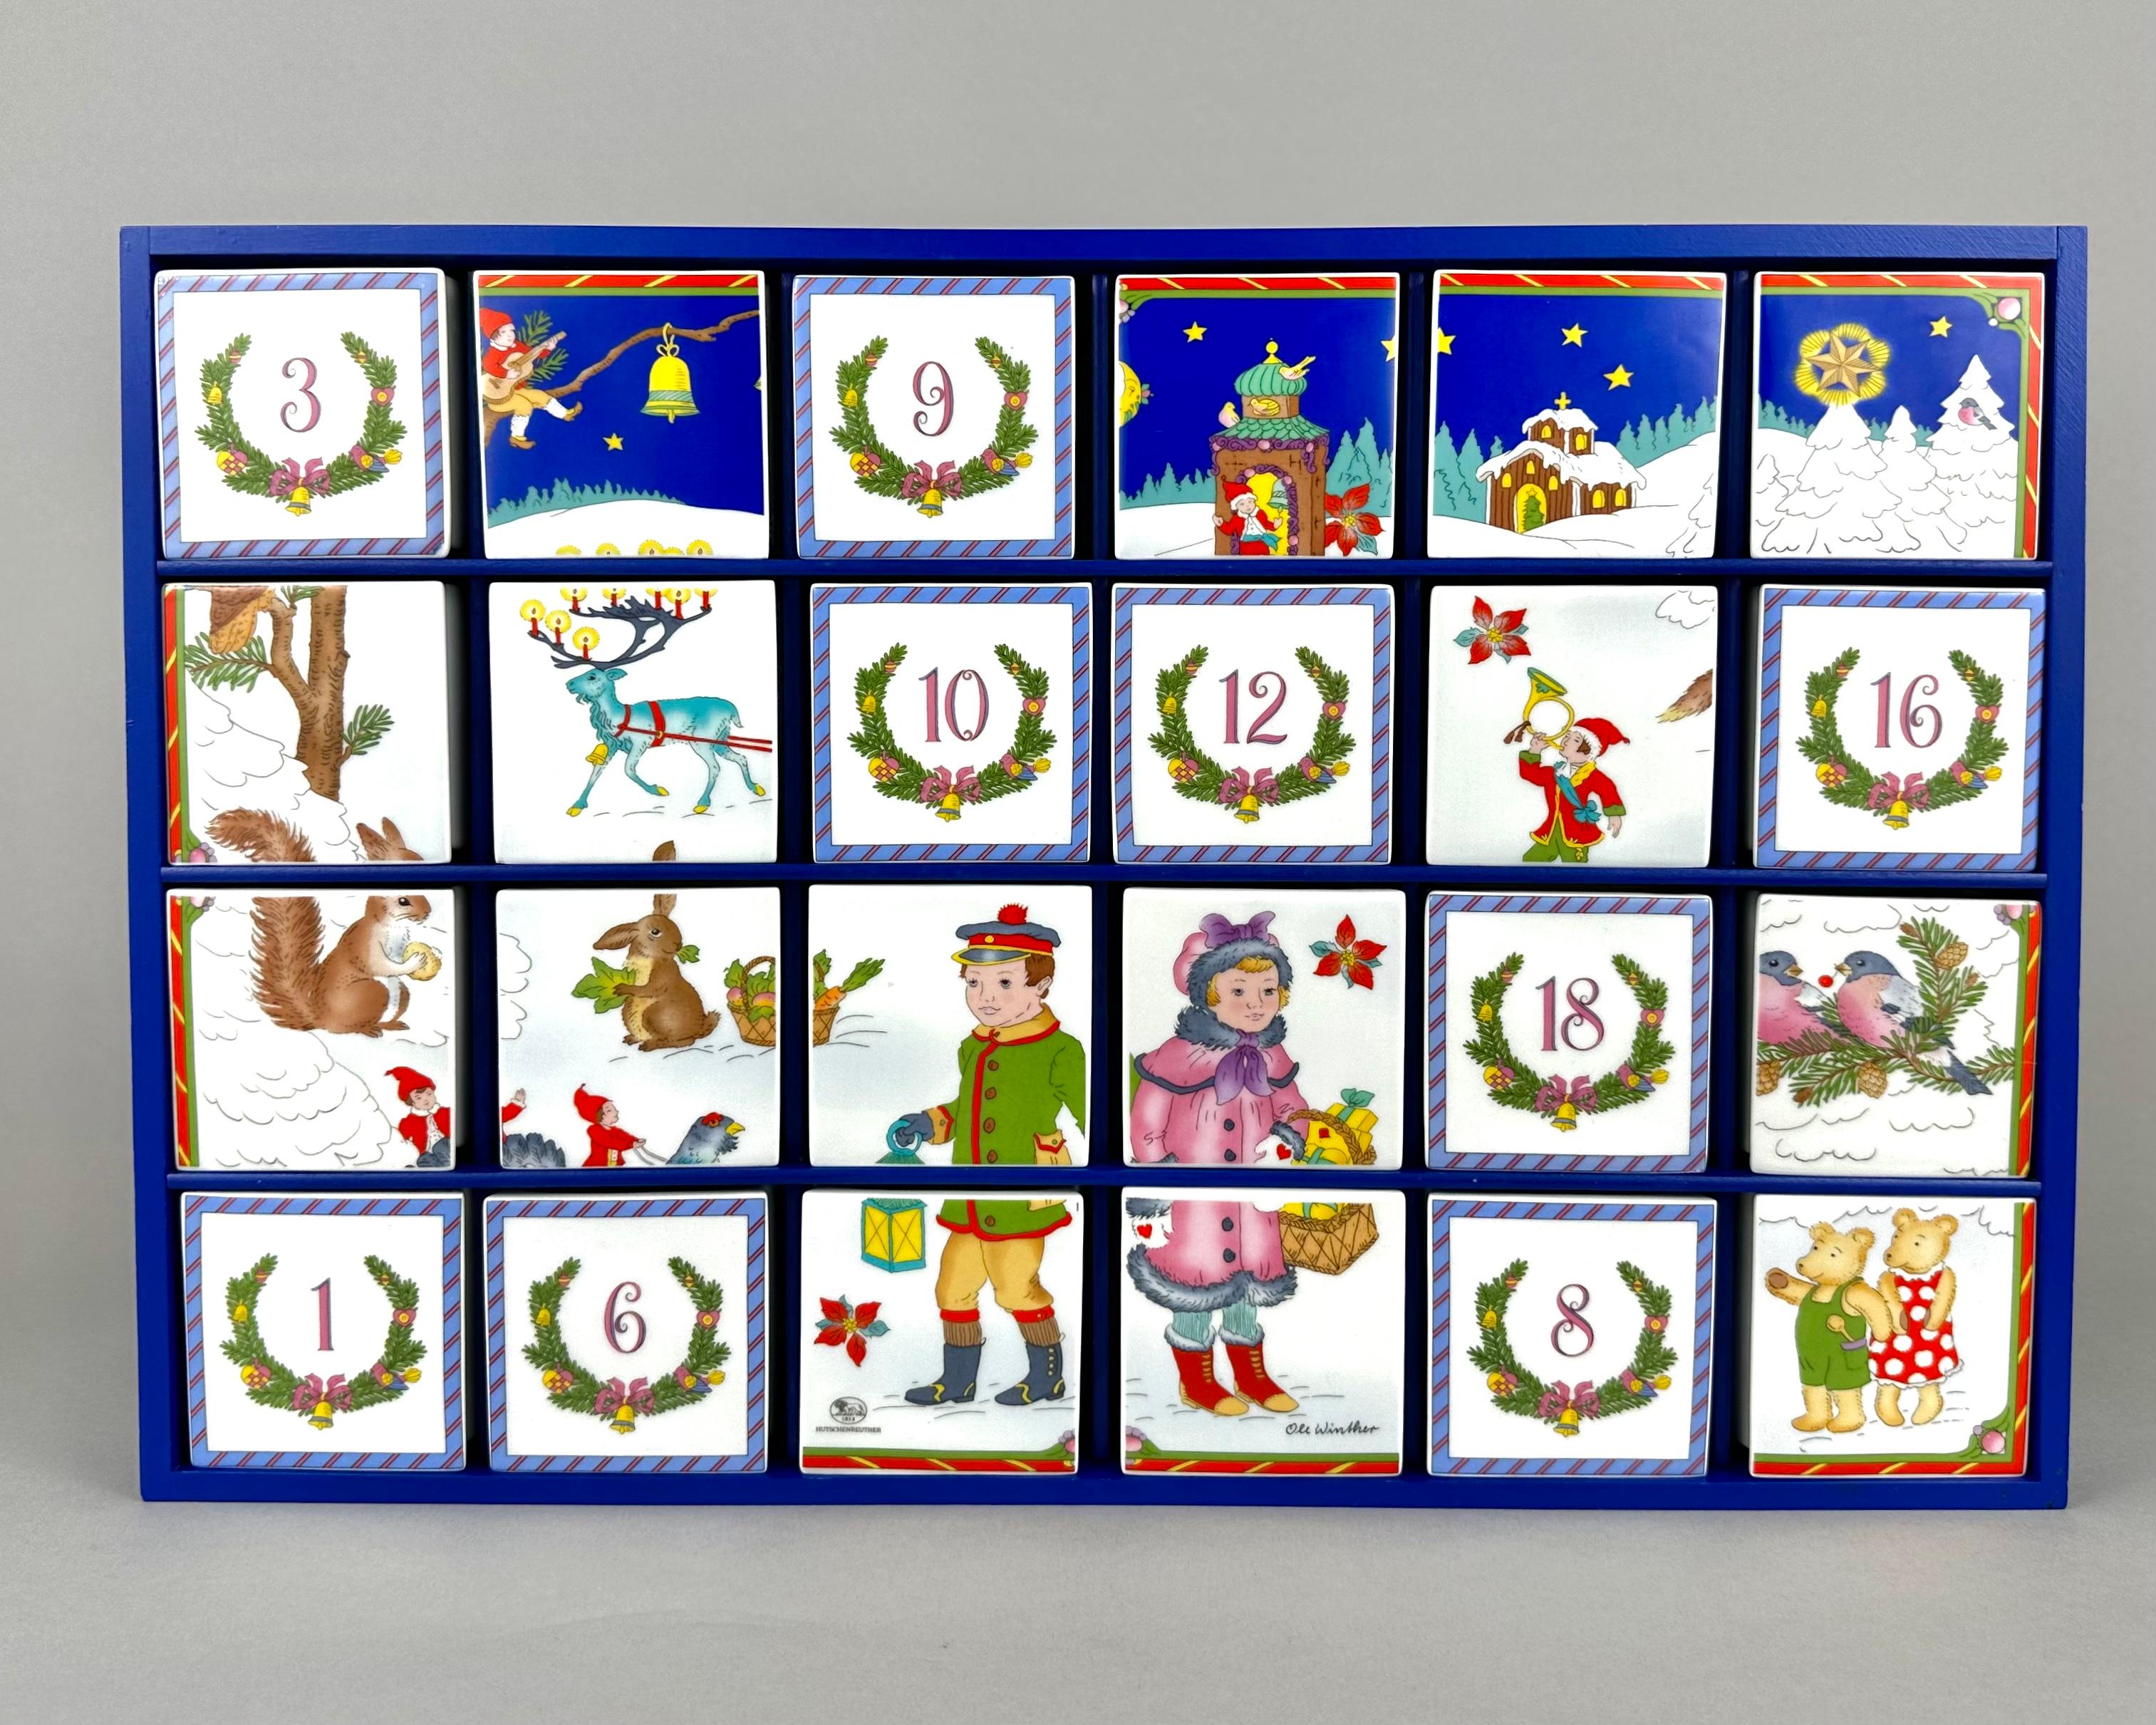 Unique Hutschenreuther Advent Calendar with Snow Landscape - Ole Winther design, 1999. 

Limited Edition. 

24 Porcelain Boxes.

The Hutschenreuther advent calendar is a special, elegant advent calendar for porcelain lovers.

Porcelain lovers know